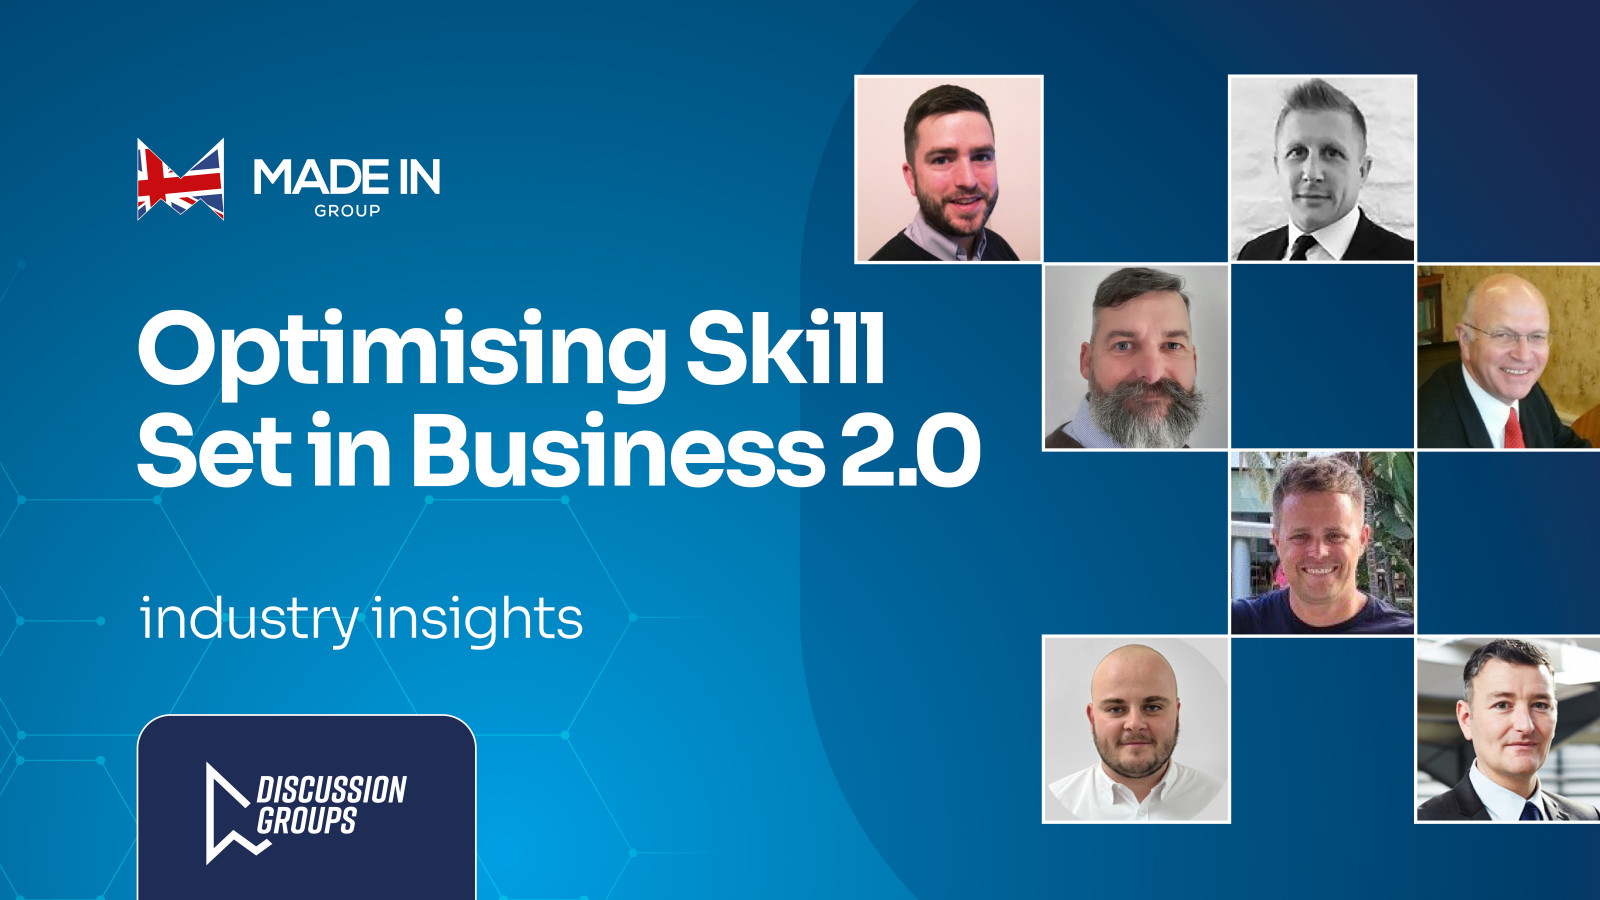 Optimising Skill Set in Business 2.0 - What Did Me...